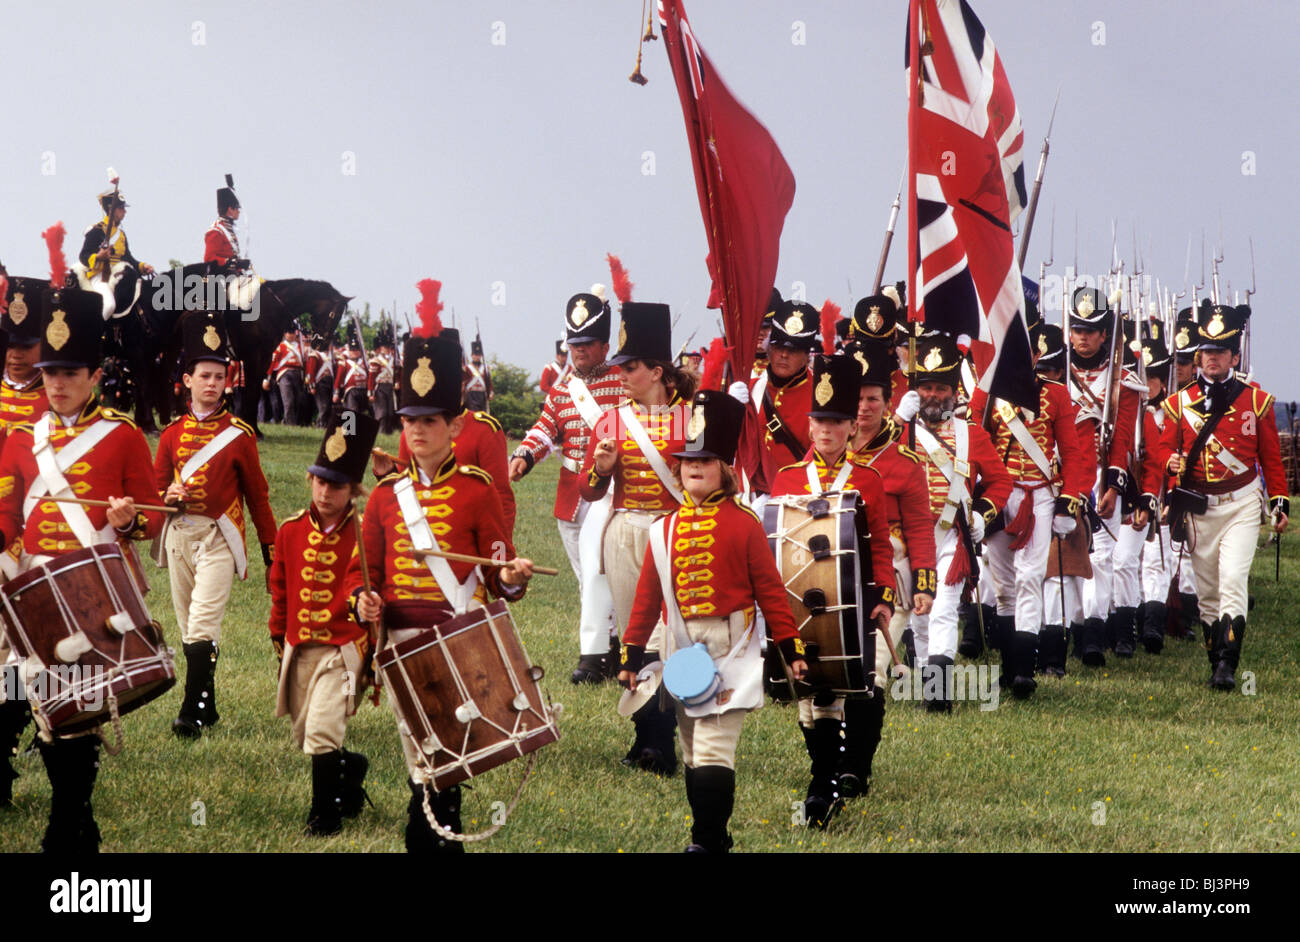 British Redcoats, 1815, marching soldier soldiers uniform uniforms military history historical re-enactment costume costumes Stock Photo